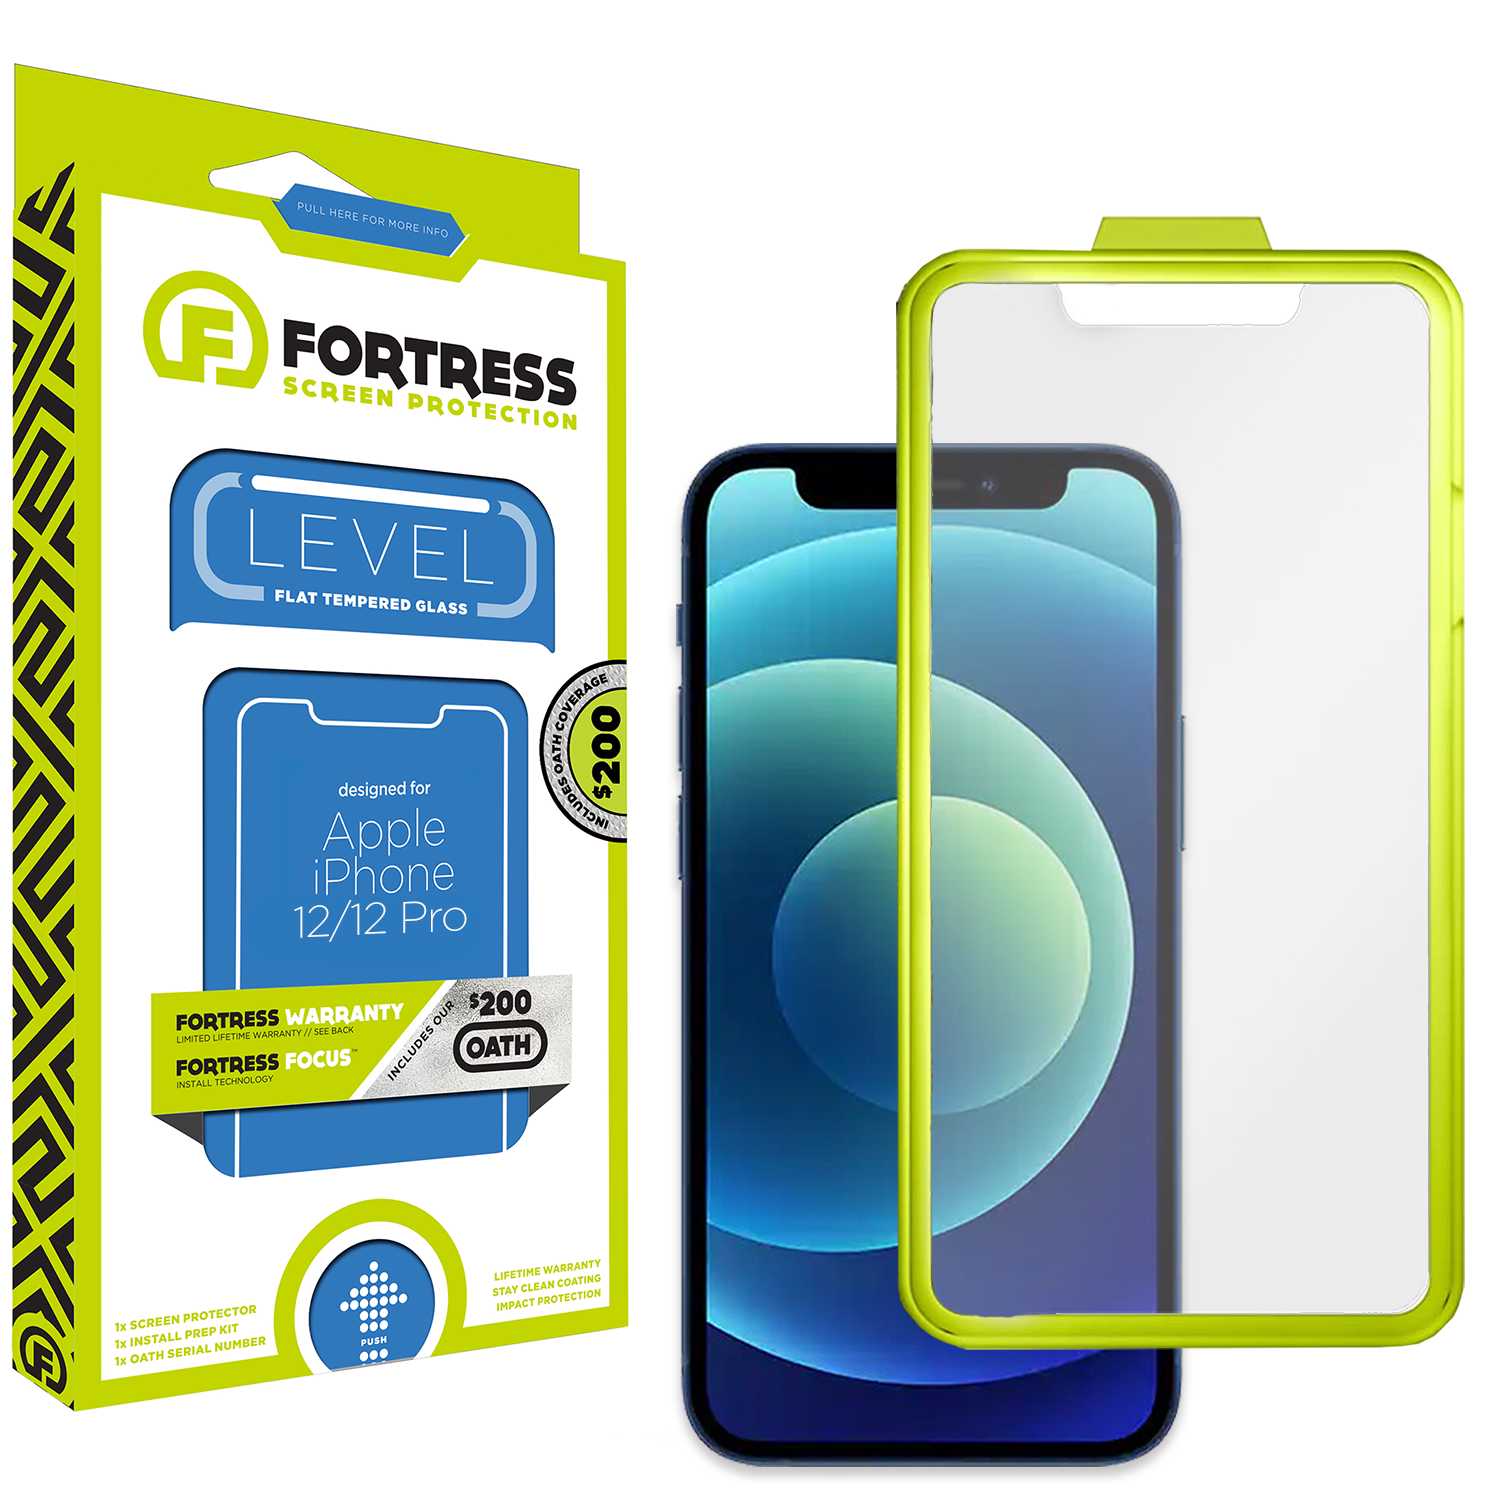 Fortress iPhone 12 Screen Protector $200CoverageInstallTool Scooch Screen Protector